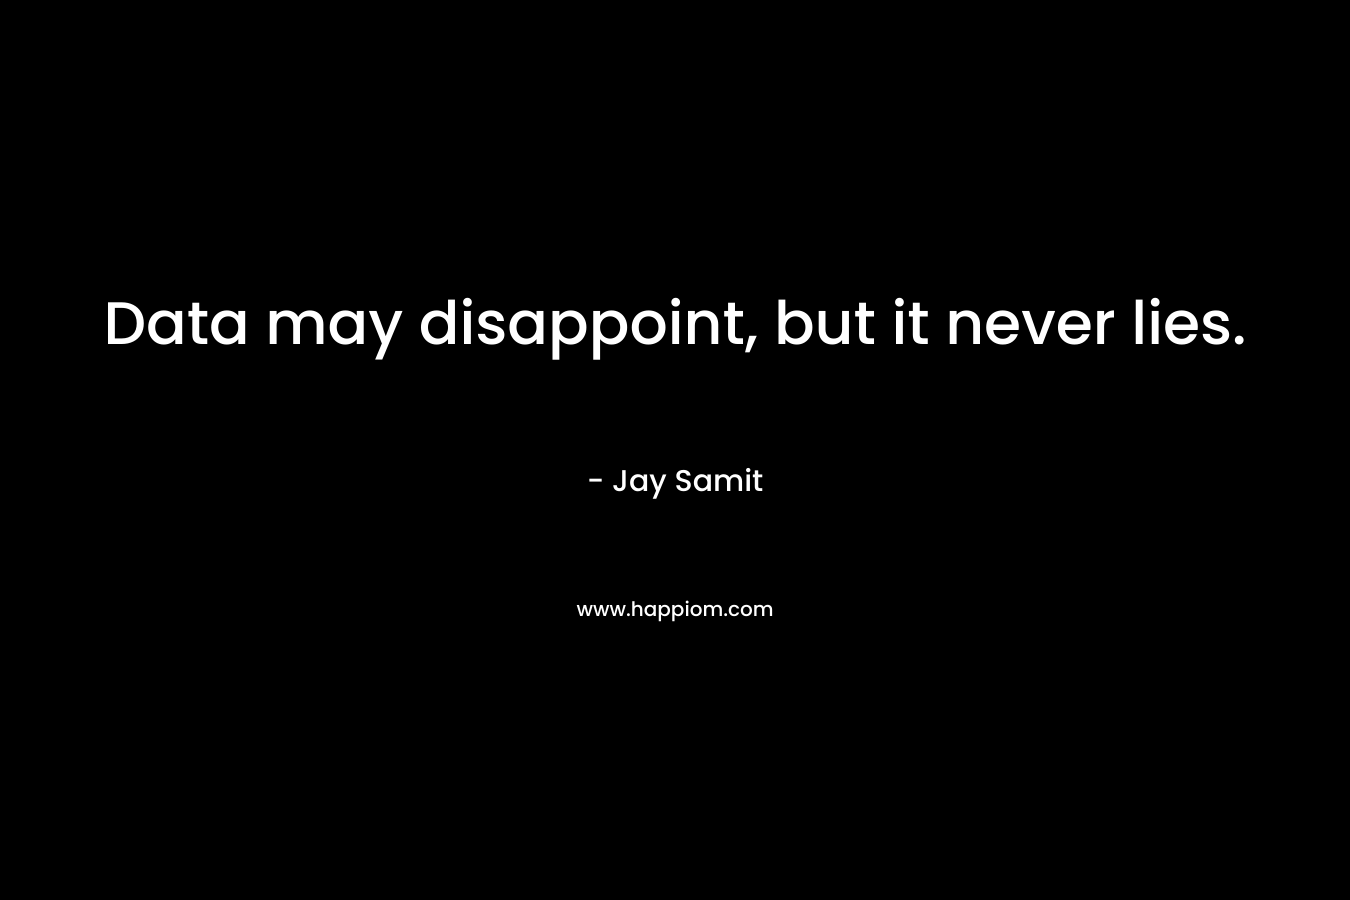 Data may disappoint, but it never lies. – Jay Samit